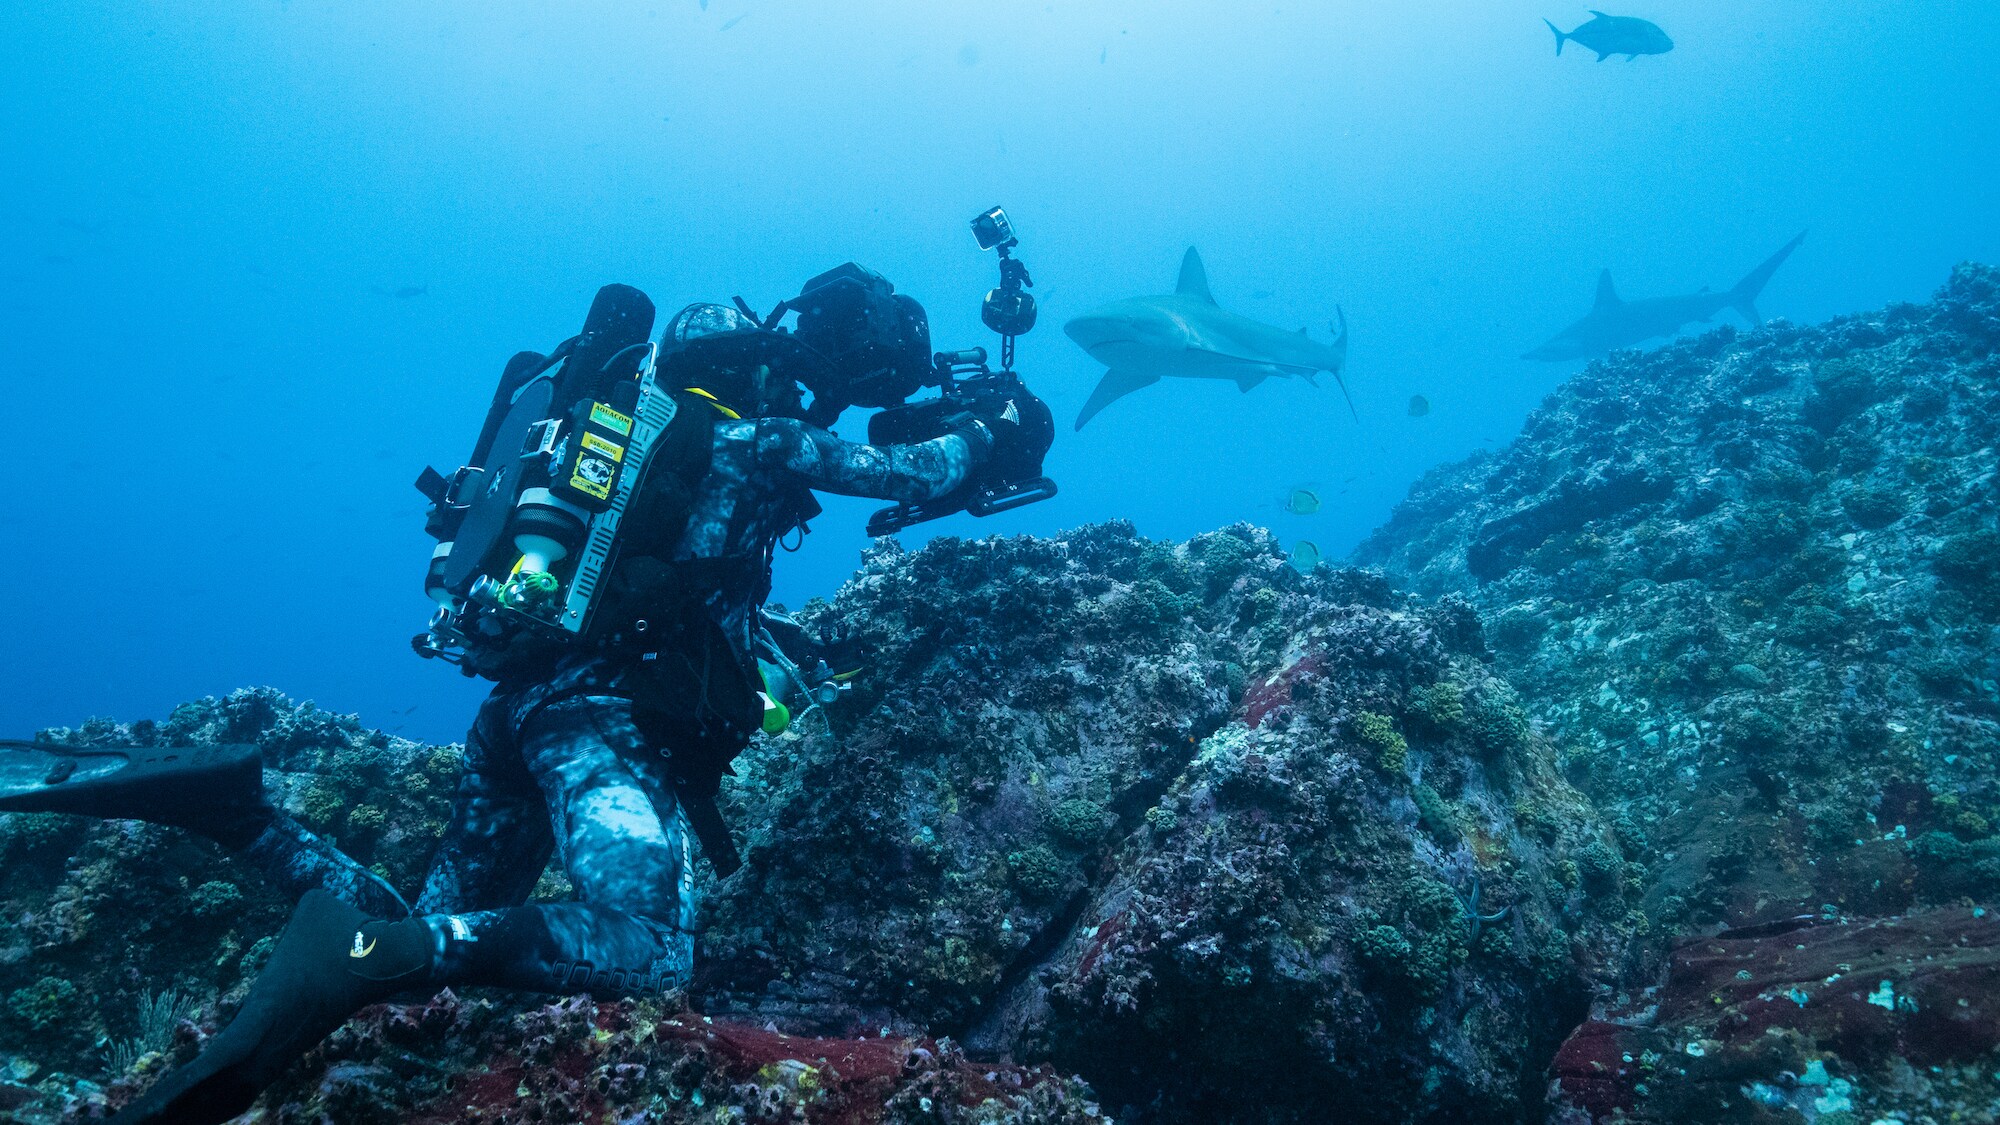 Bertie Gregory filming hammerhead sharks. (Credit: National Geographic/Hugh Pearson for Disney+)